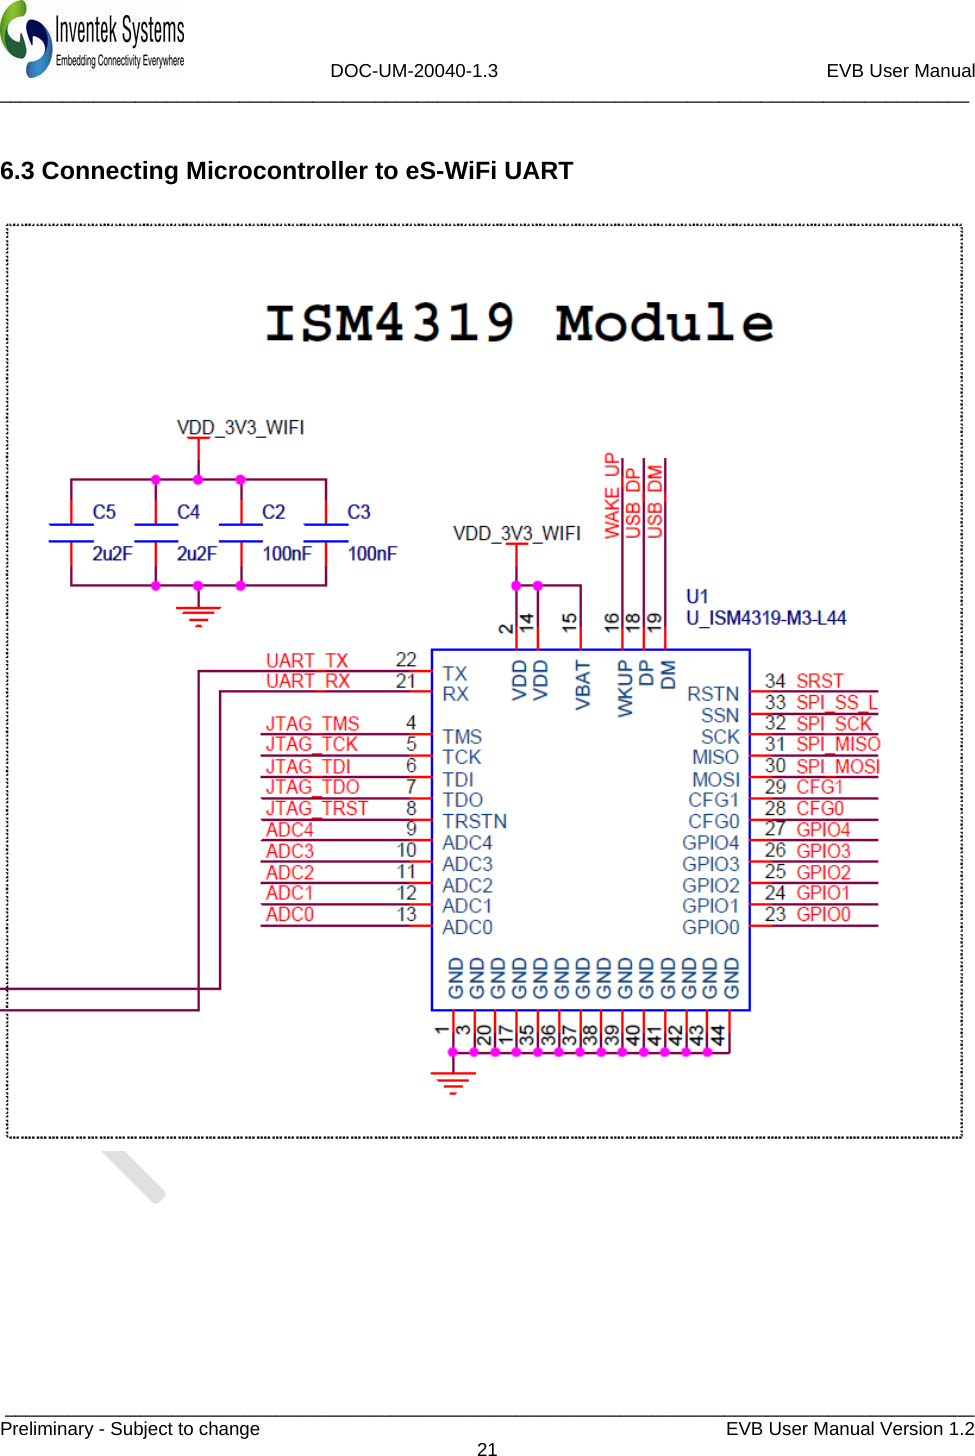                             DOC-UM-20040-1.3                                                         EVB User Manual  _____________________________________________________________________________________________  _____________________________________________________________________________________________Preliminary - Subject to change   EVB User Manual Version 1.2  21   6.3 Connecting Microcontroller to eS-WiFi UART           